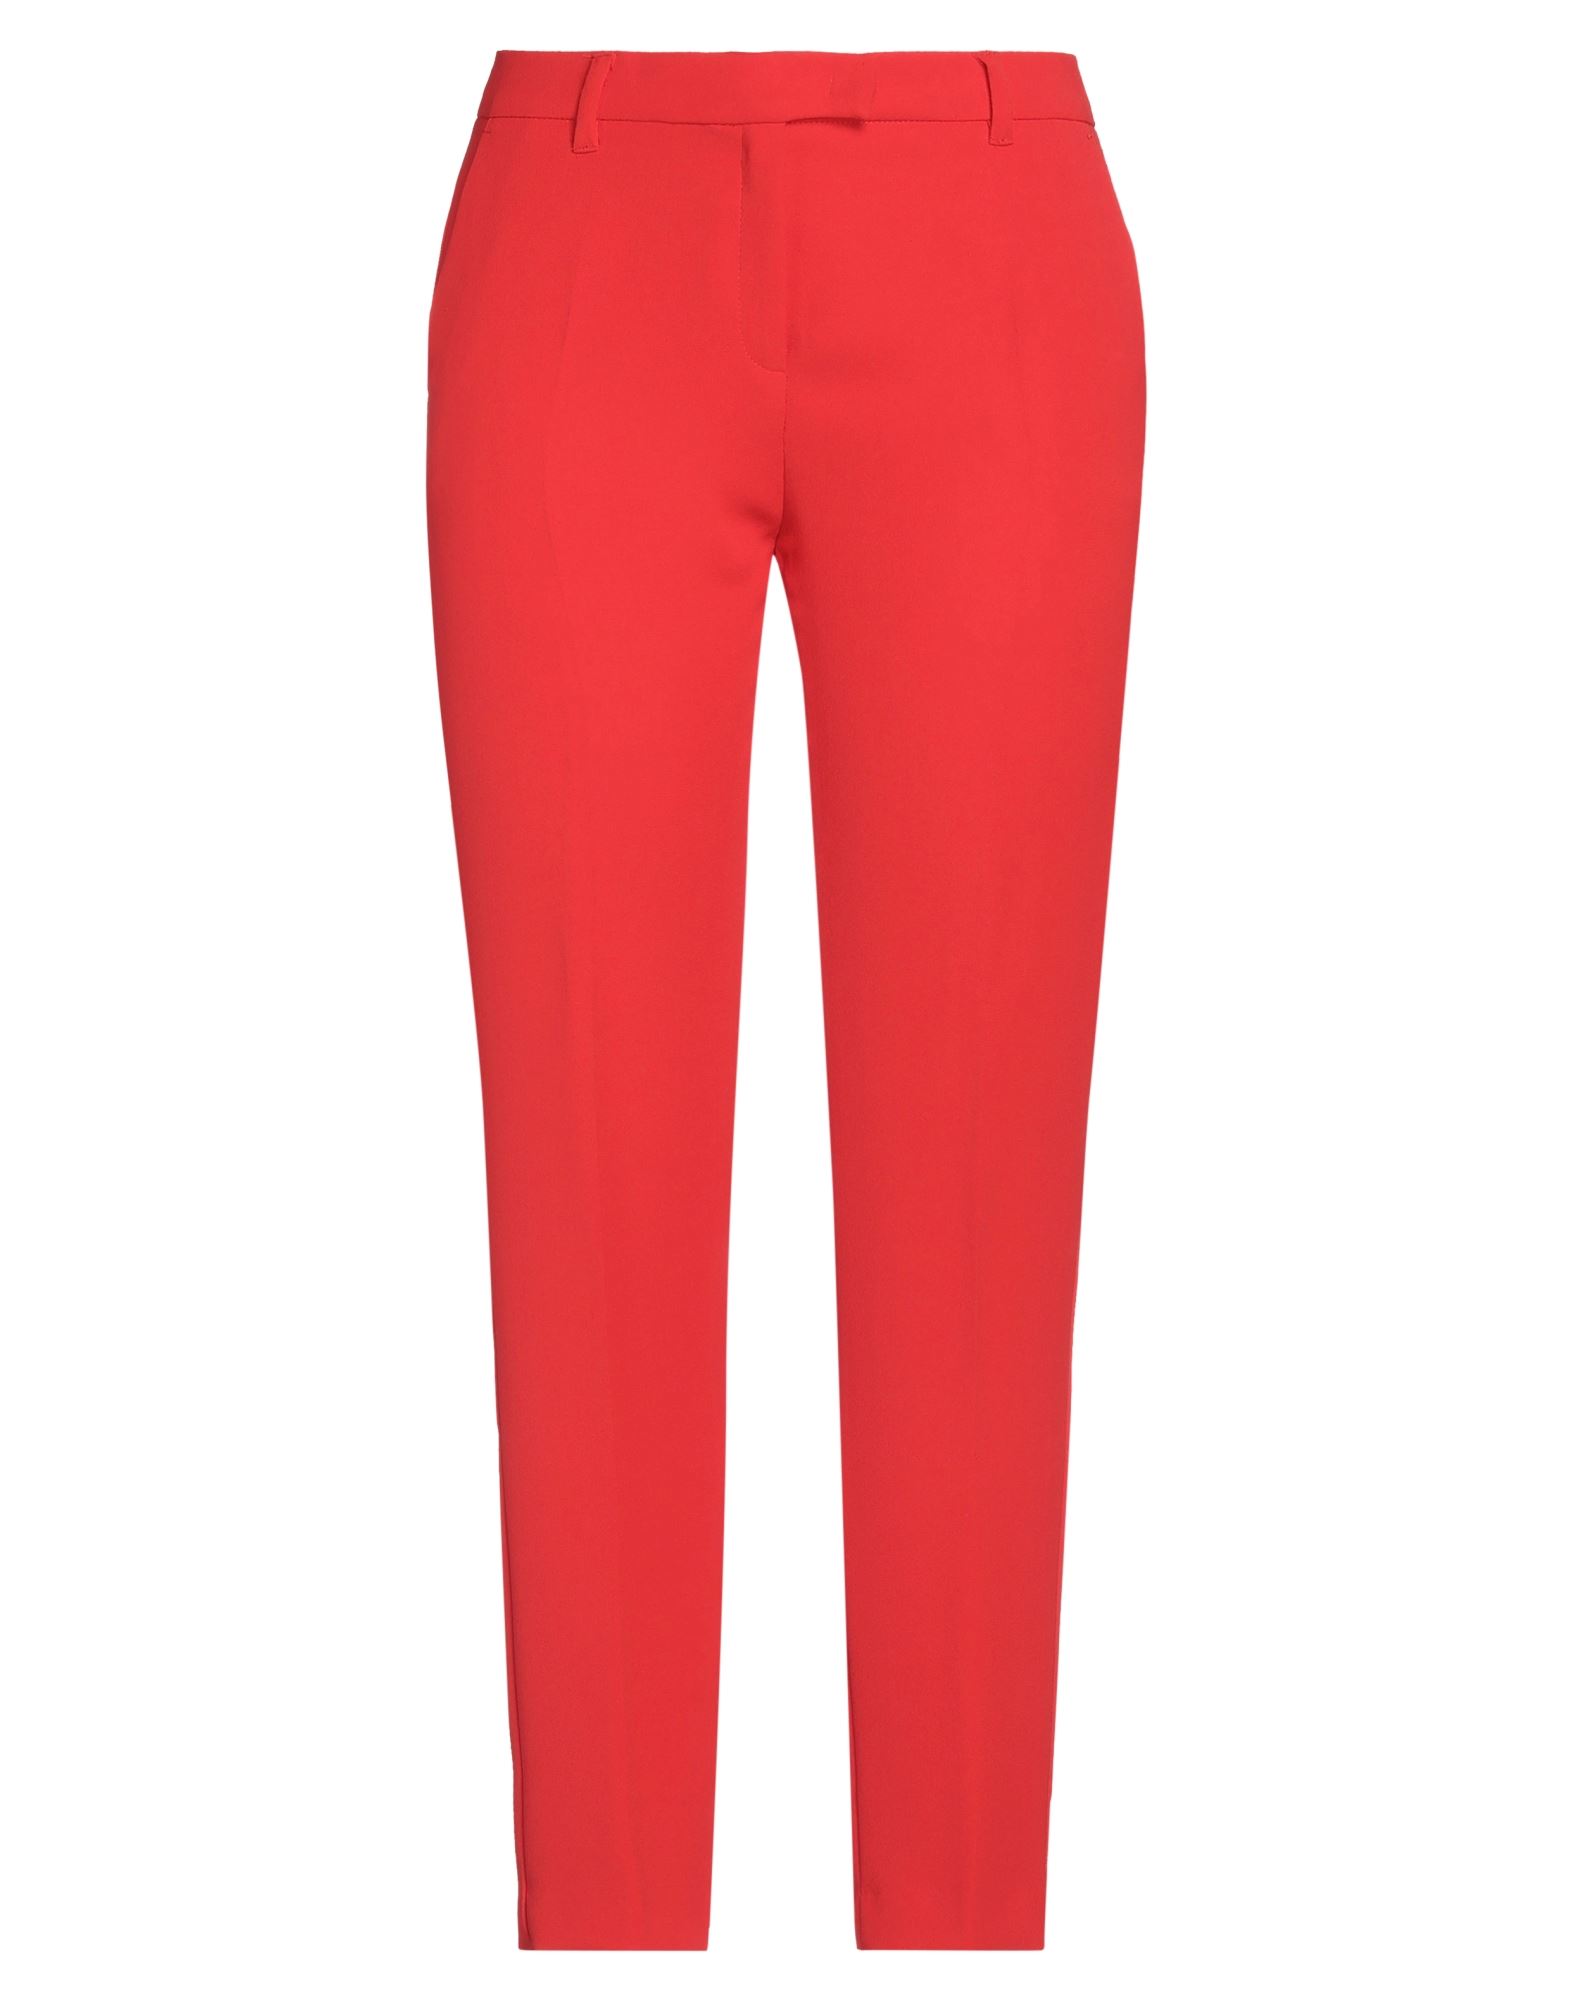 CARACTERE CARACTÈRE WOMAN PANTS RED SIZE 6 POLYESTER